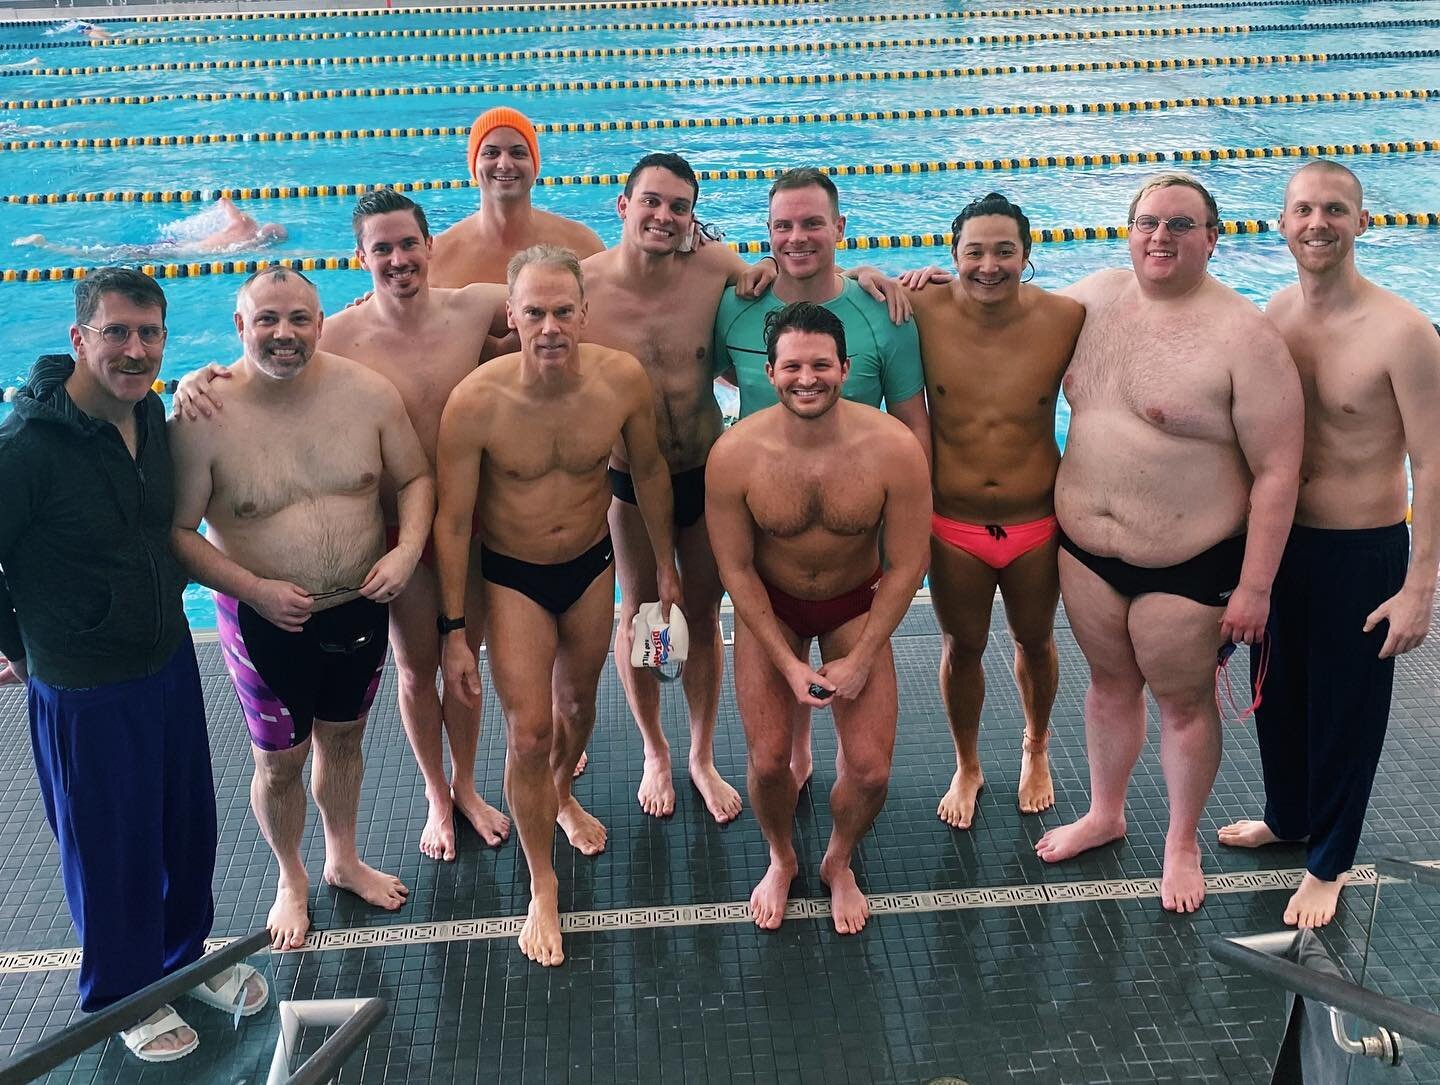 The gays take over @minnesotamastersswimming State! Currently sitting in 3rd - highest state placement ever! Good luck to the few swimmers competing tomorrow. Win one for the gays!
.
.
.
#mniceswimclub #minnesotamastersswimming #mastersswimming #gays